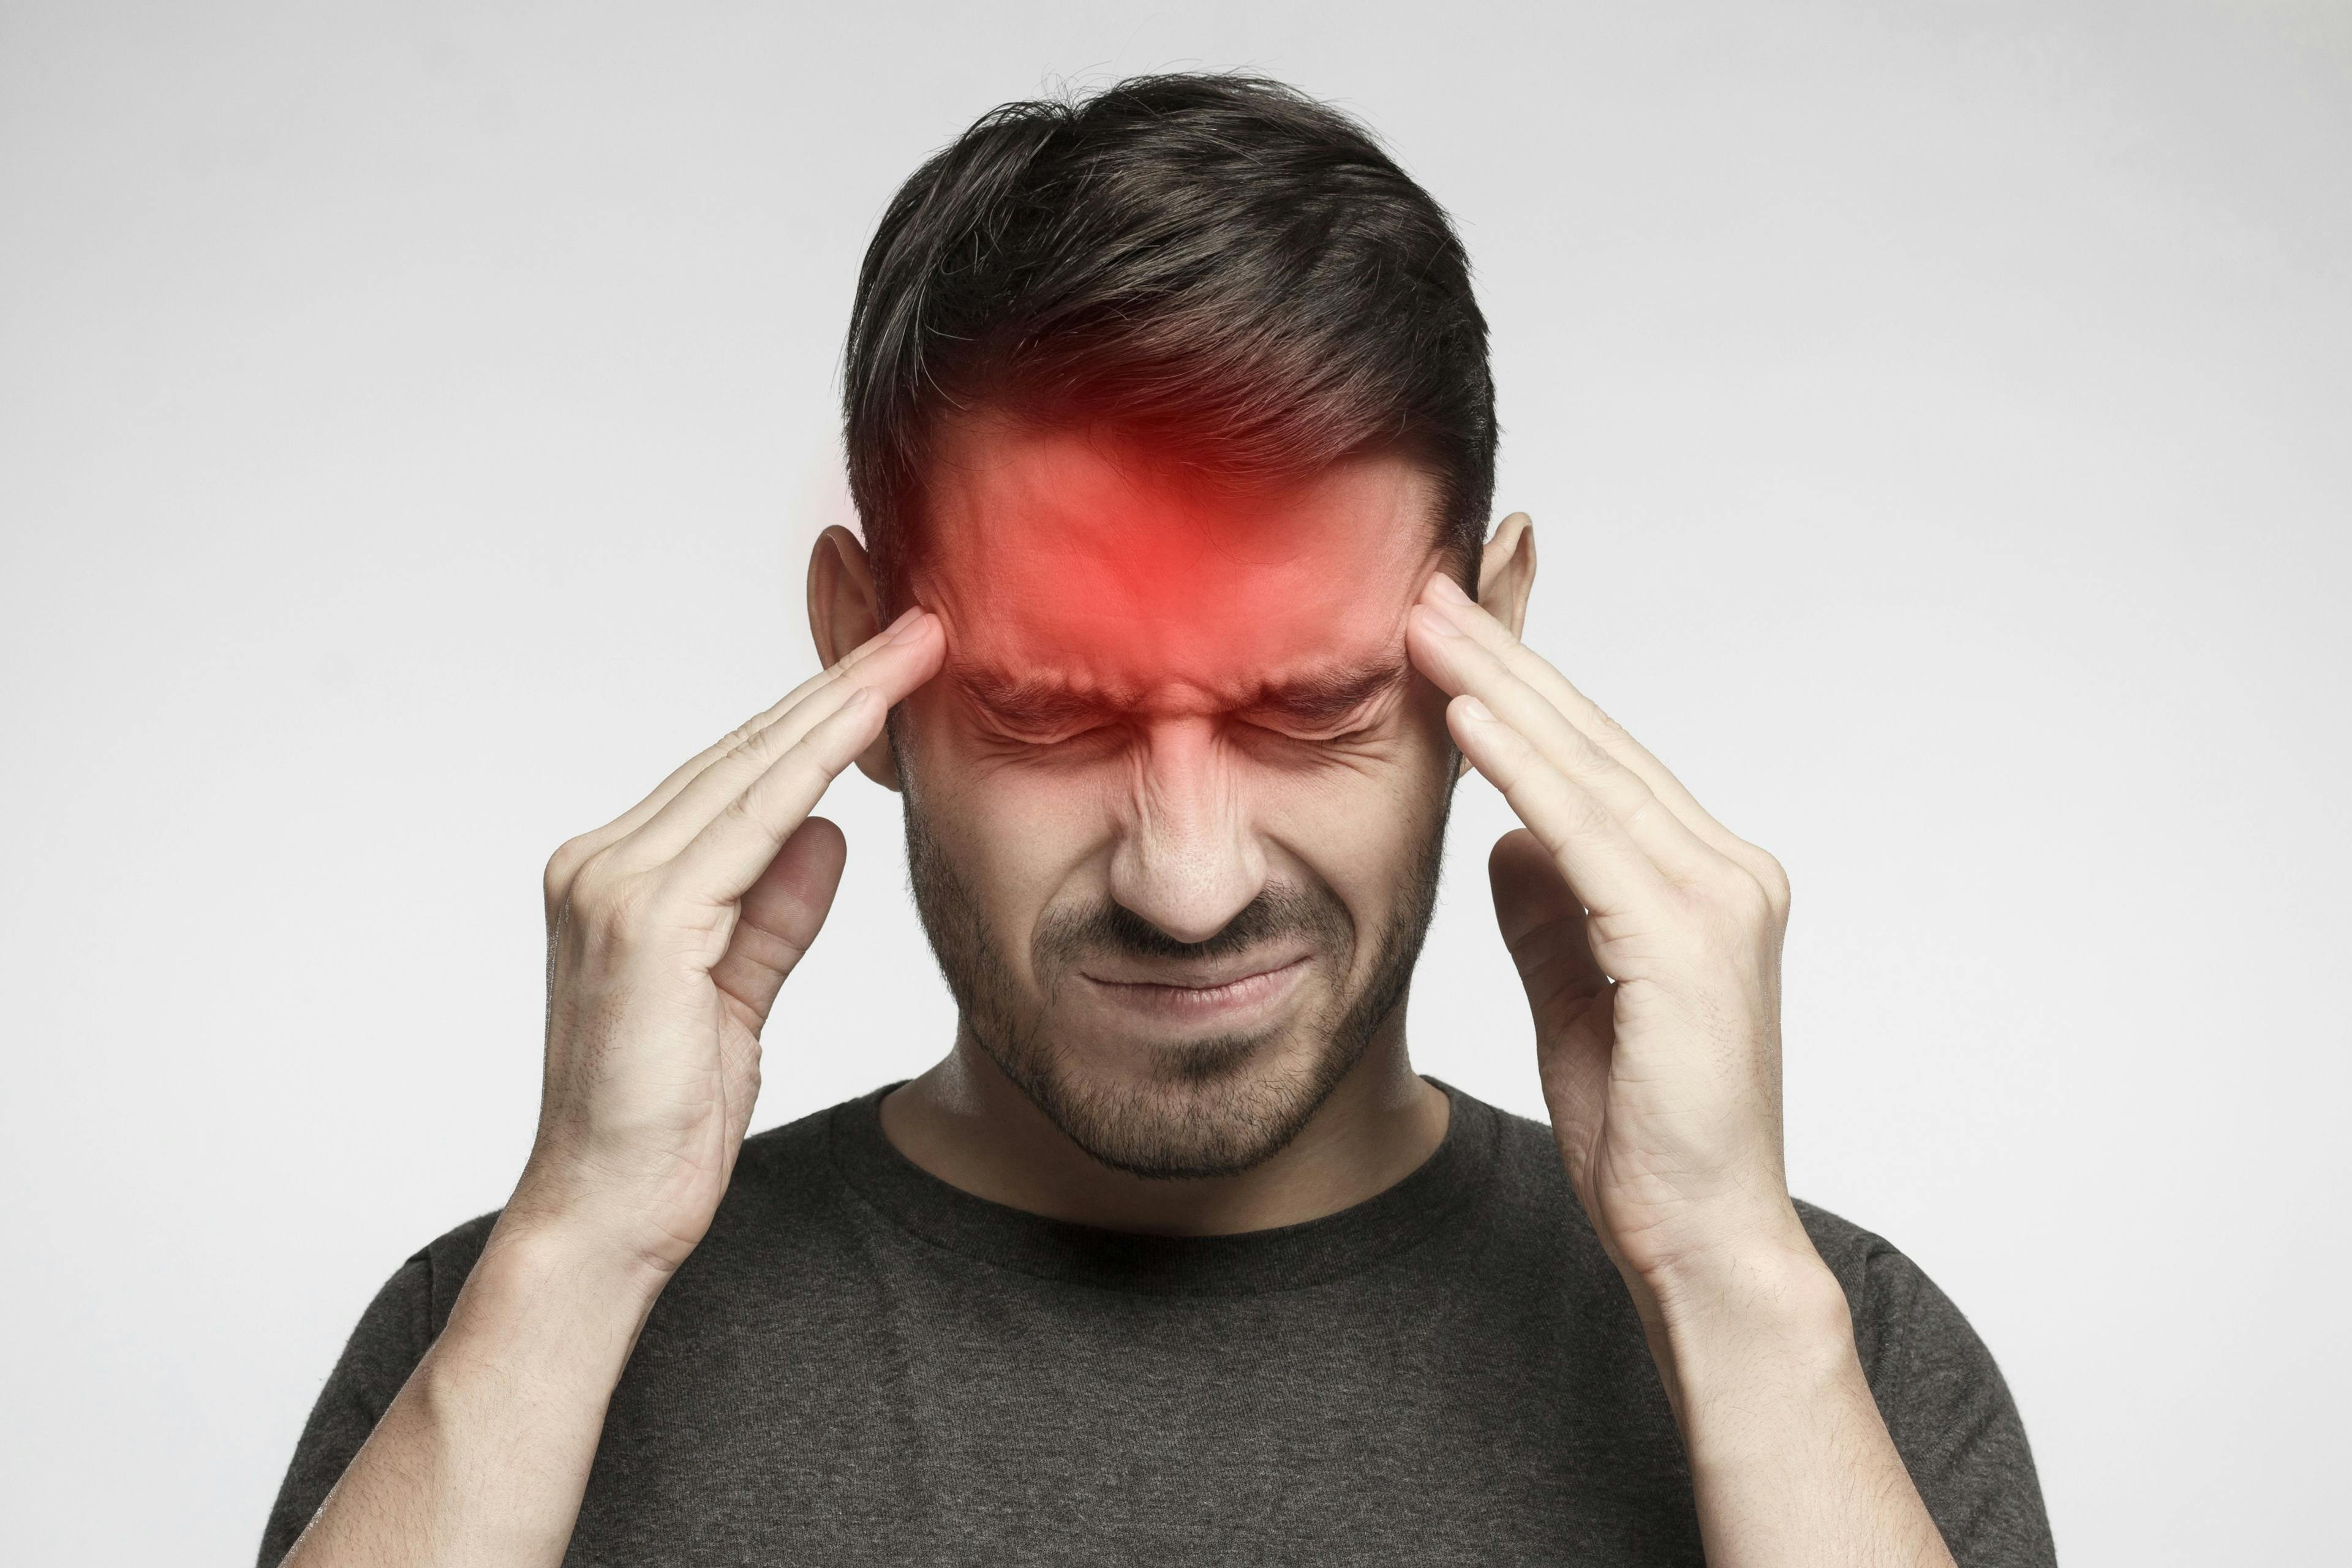 Portrait of young man isolated on gray background, suffering from severe headache, pressing fingers to temples with closed eyes. Credit: Damir Khabirov - stock.adobe.com